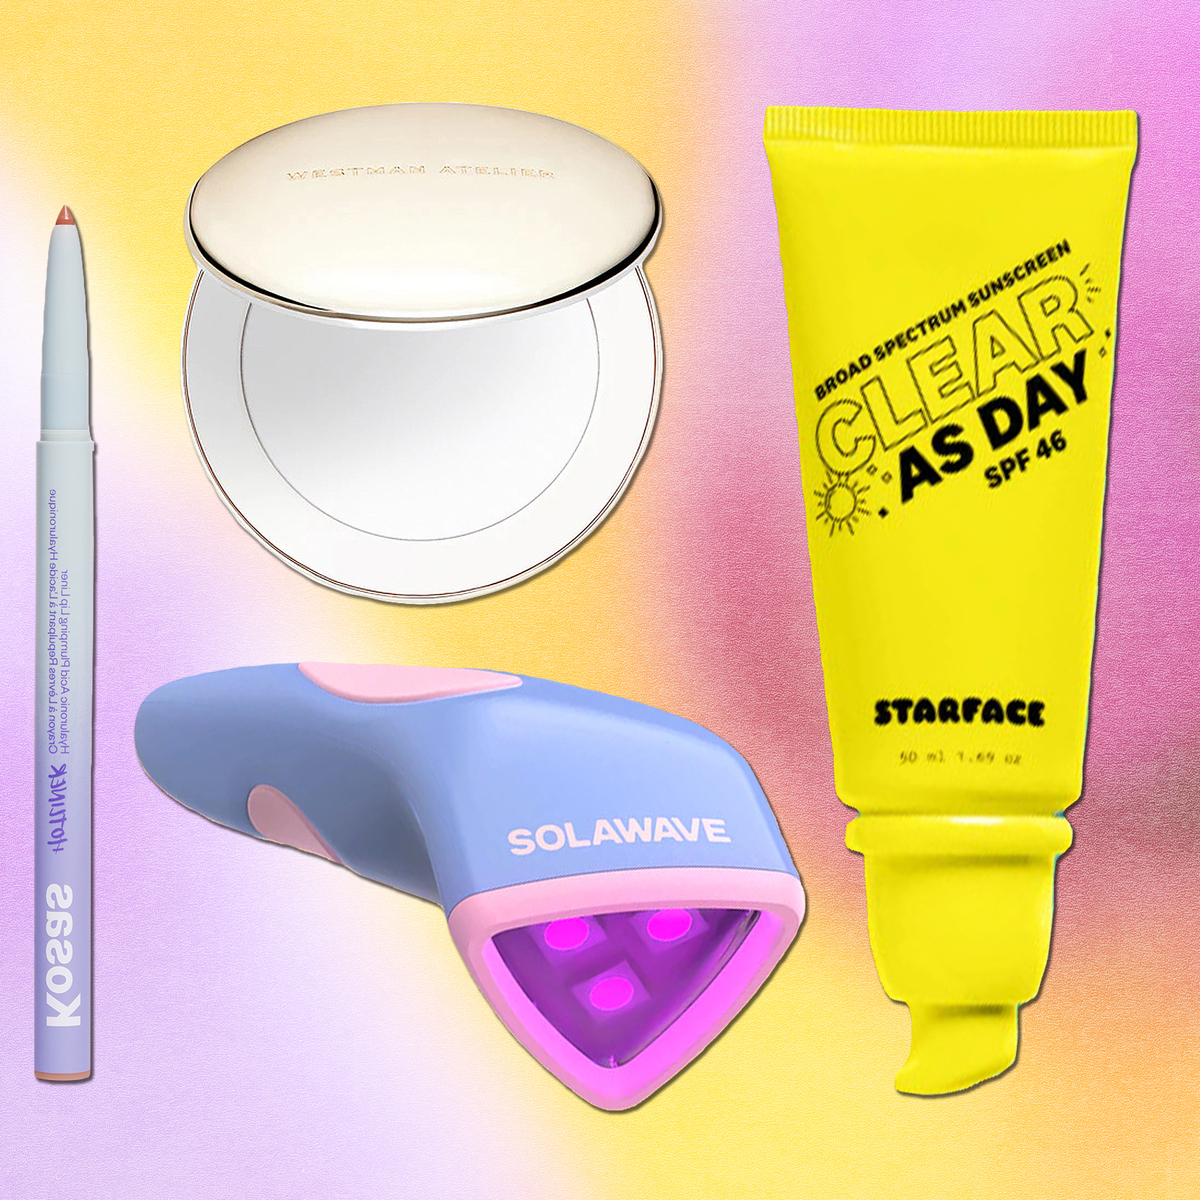 The 20 Best New Beauty Products of June 20, According to Editors